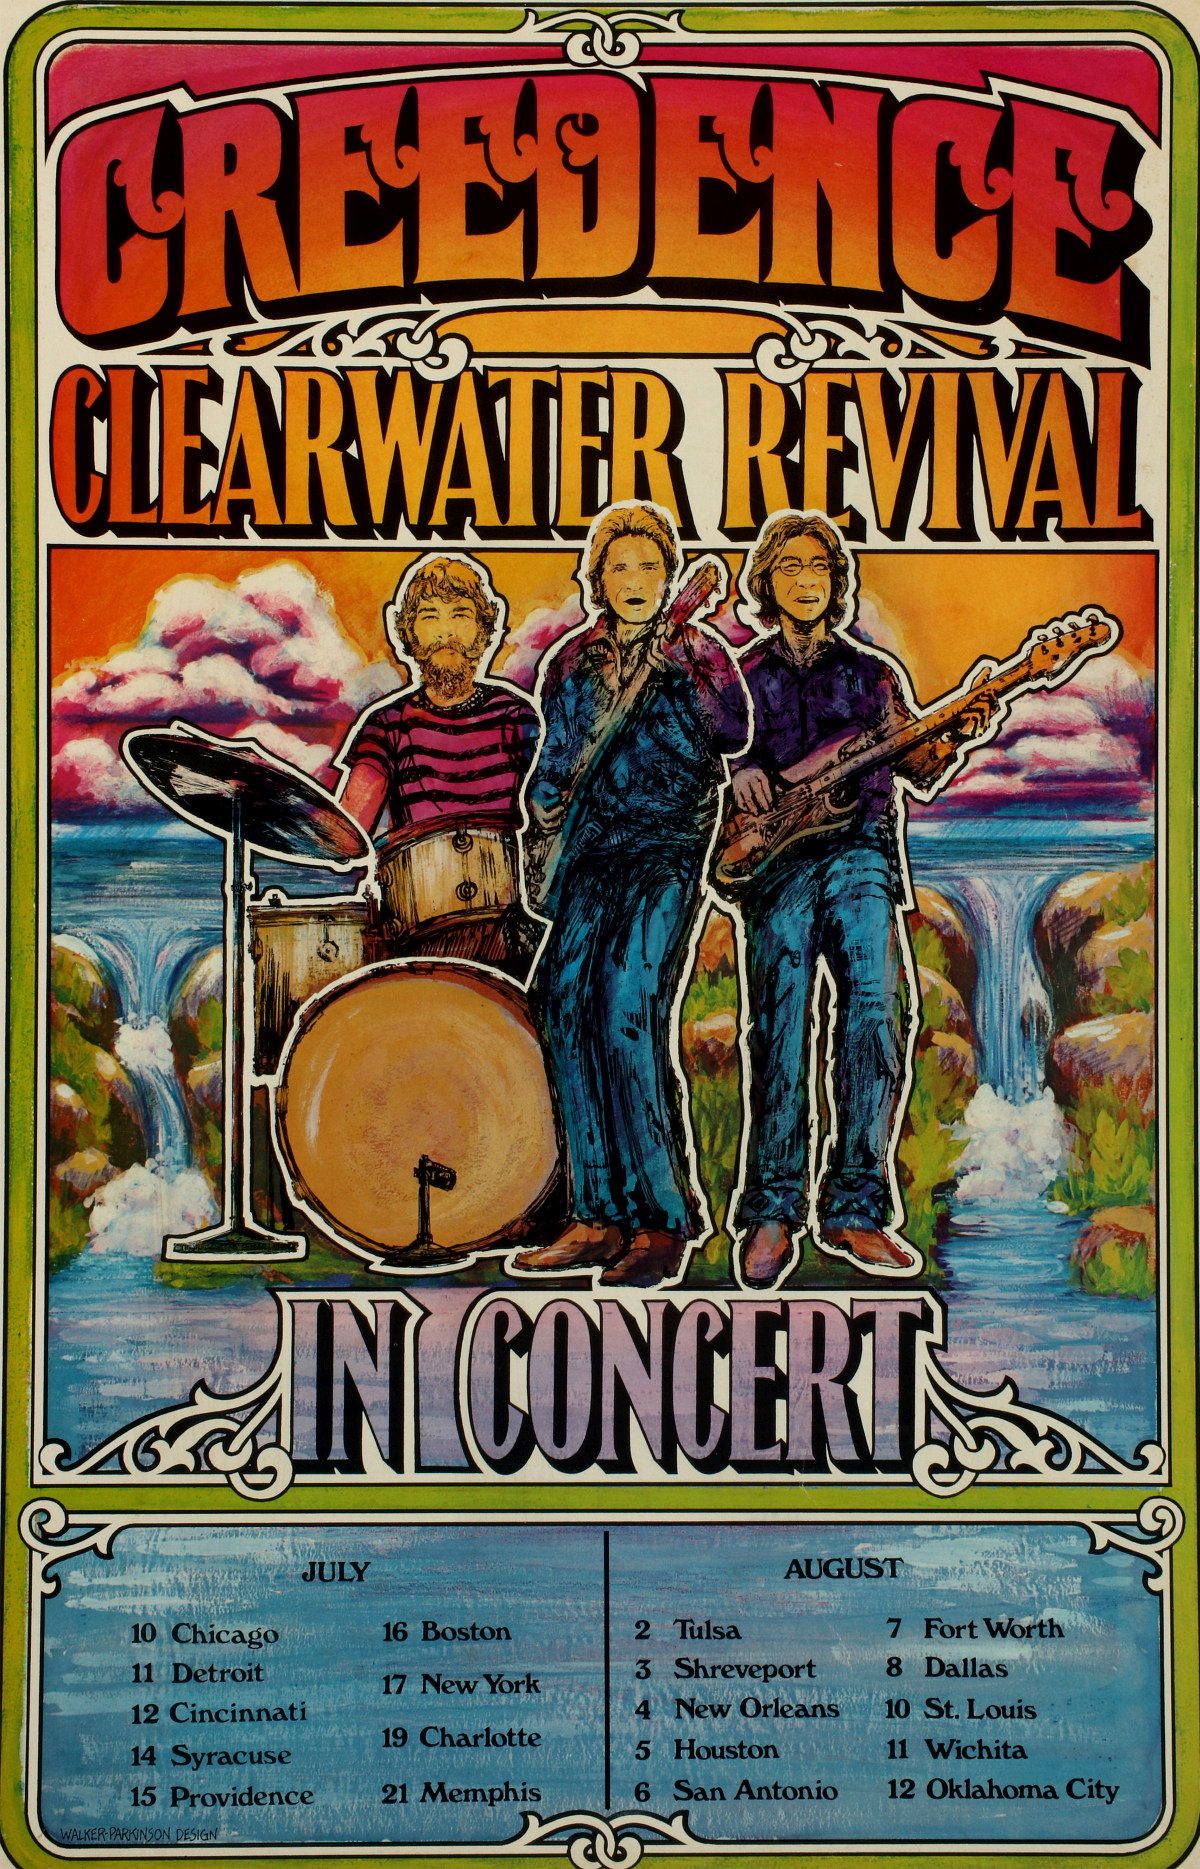 A 1971 CREEDENCE CLEARWATER REVIVAL CONCERT TOUR POSTER